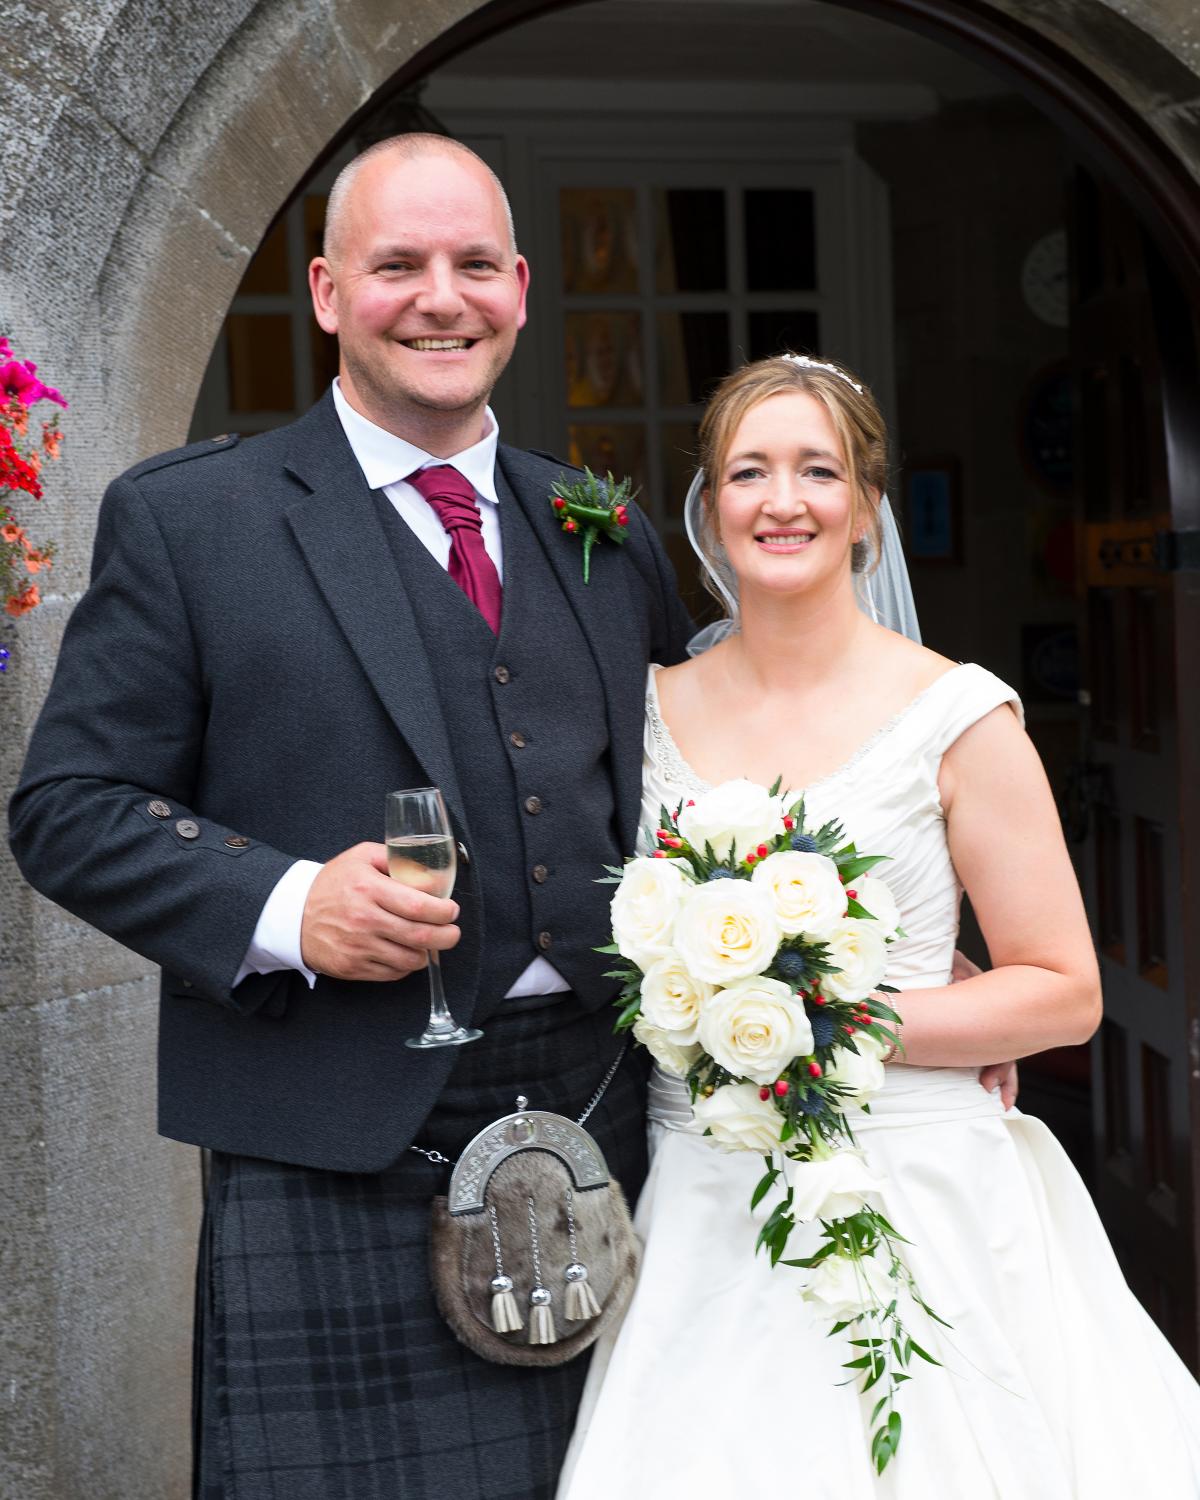 Claire Lennox of Horselea Farm, Forgandenny, married Christopher Young, formerly Gifford, Edinburgh now both Forgandenny, Perthshire, at Ballathie House Hotel, Stanley

Photo: Neil Fordyce Photography
